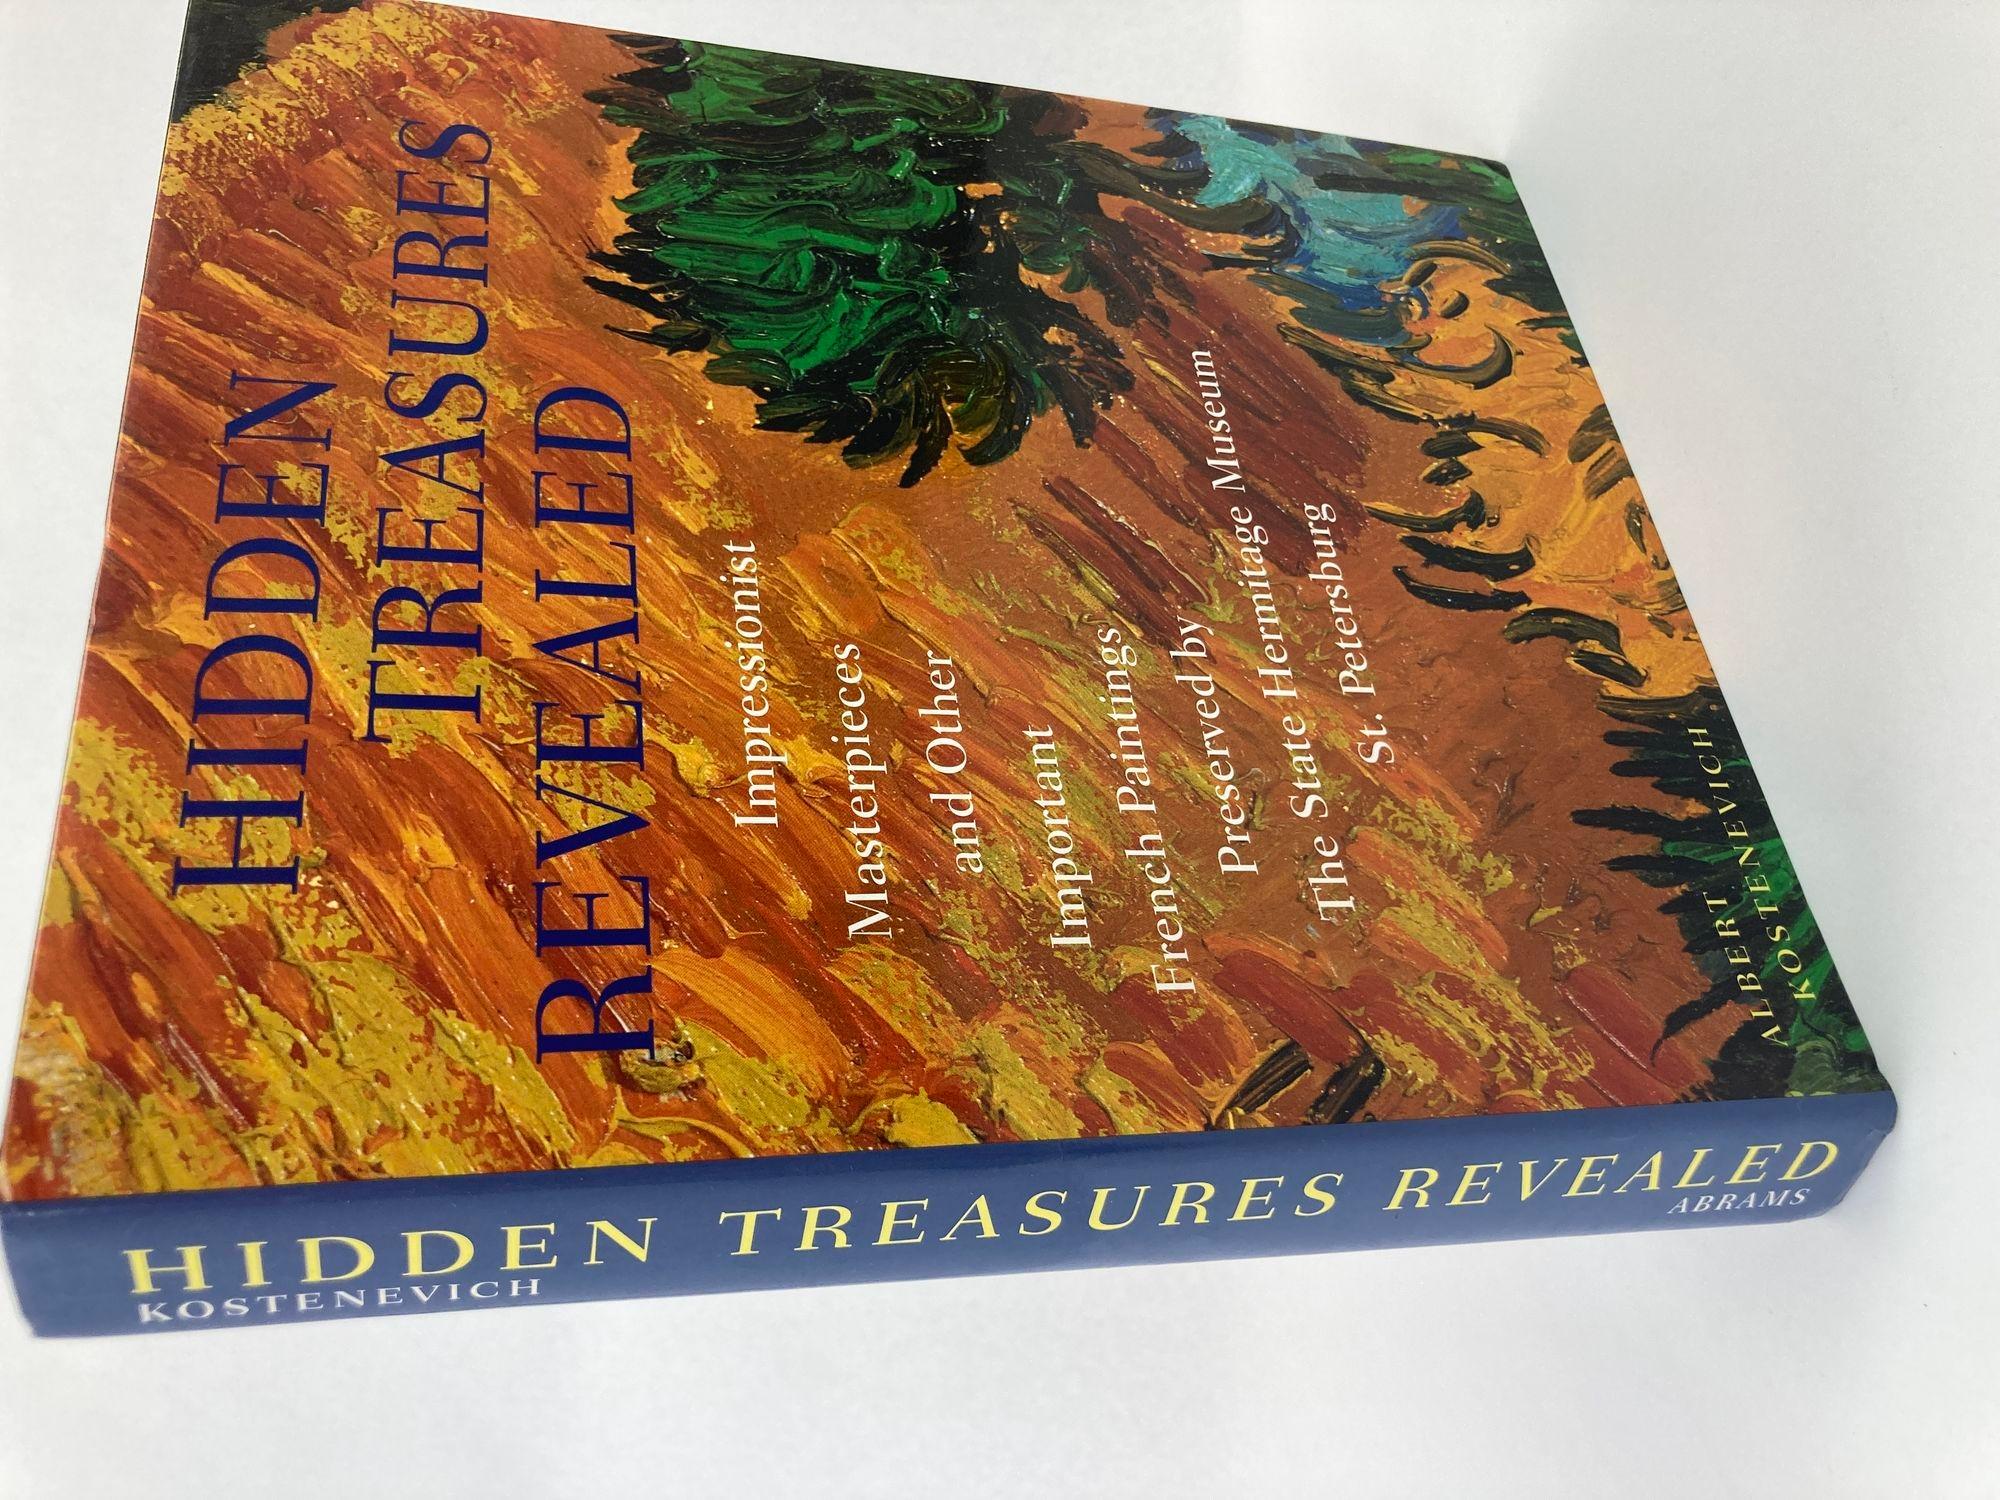 Hidden Treasures Revealed: Impressionist Masterpieces and Other Important French Paintings Preserved by the State Hermitage Museum, St. Petersburg.Hardcover – January 1, 1995 by Albert G. Kostenevich.Shows and describes French paintings that were